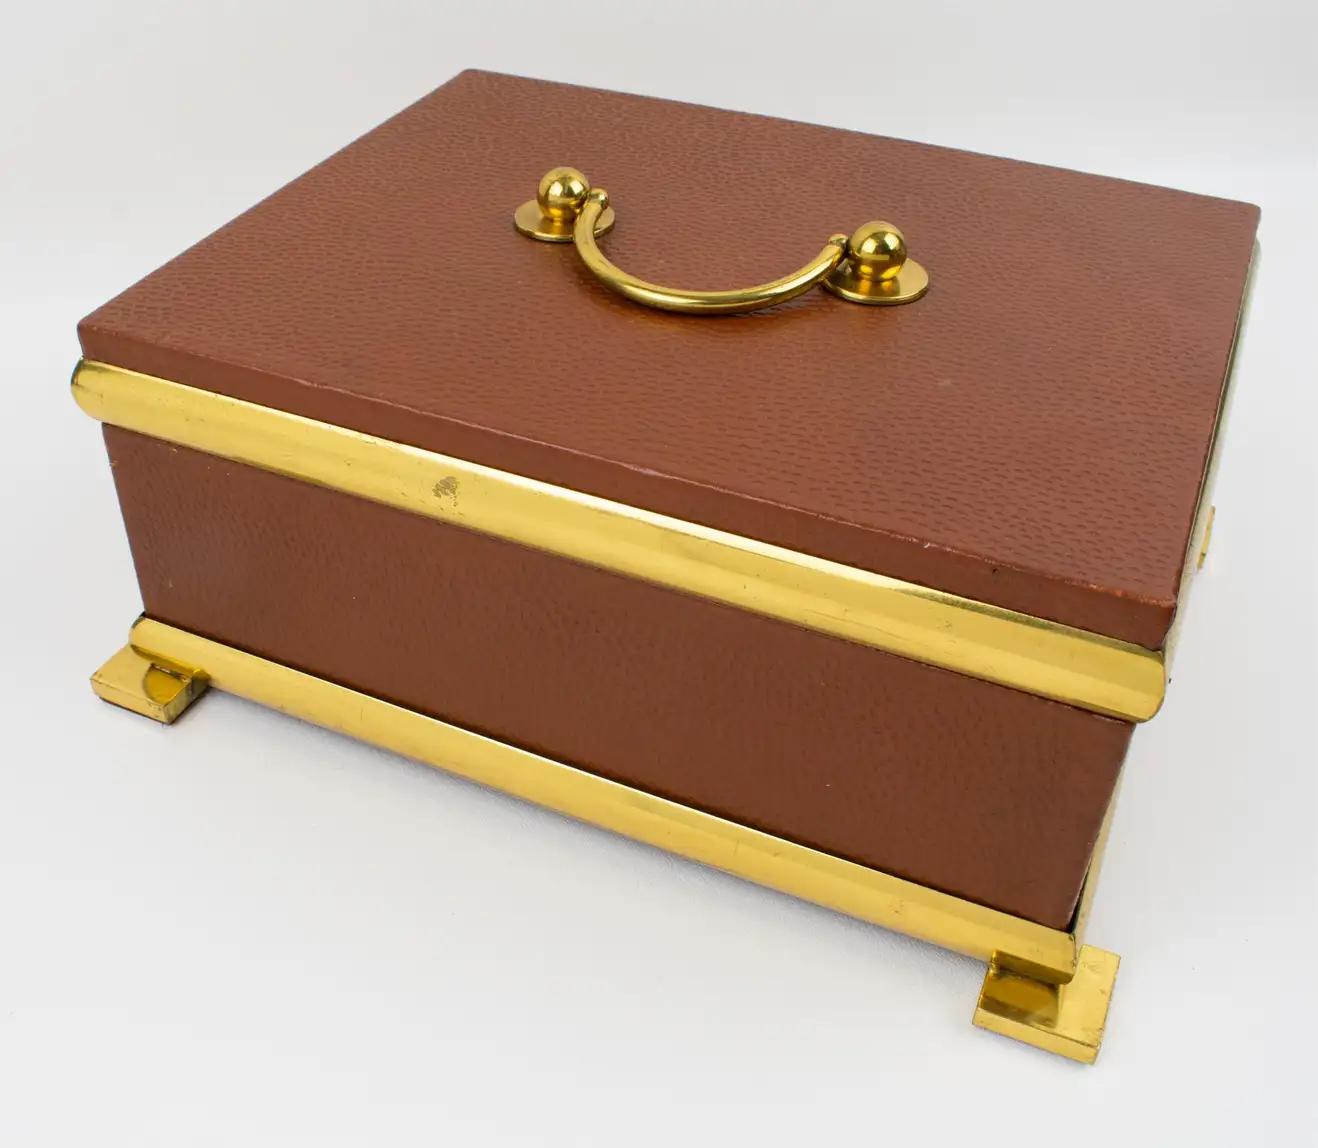 Italian Leather and Brass Decorative Box, 1950s Empire Style For Sale 5